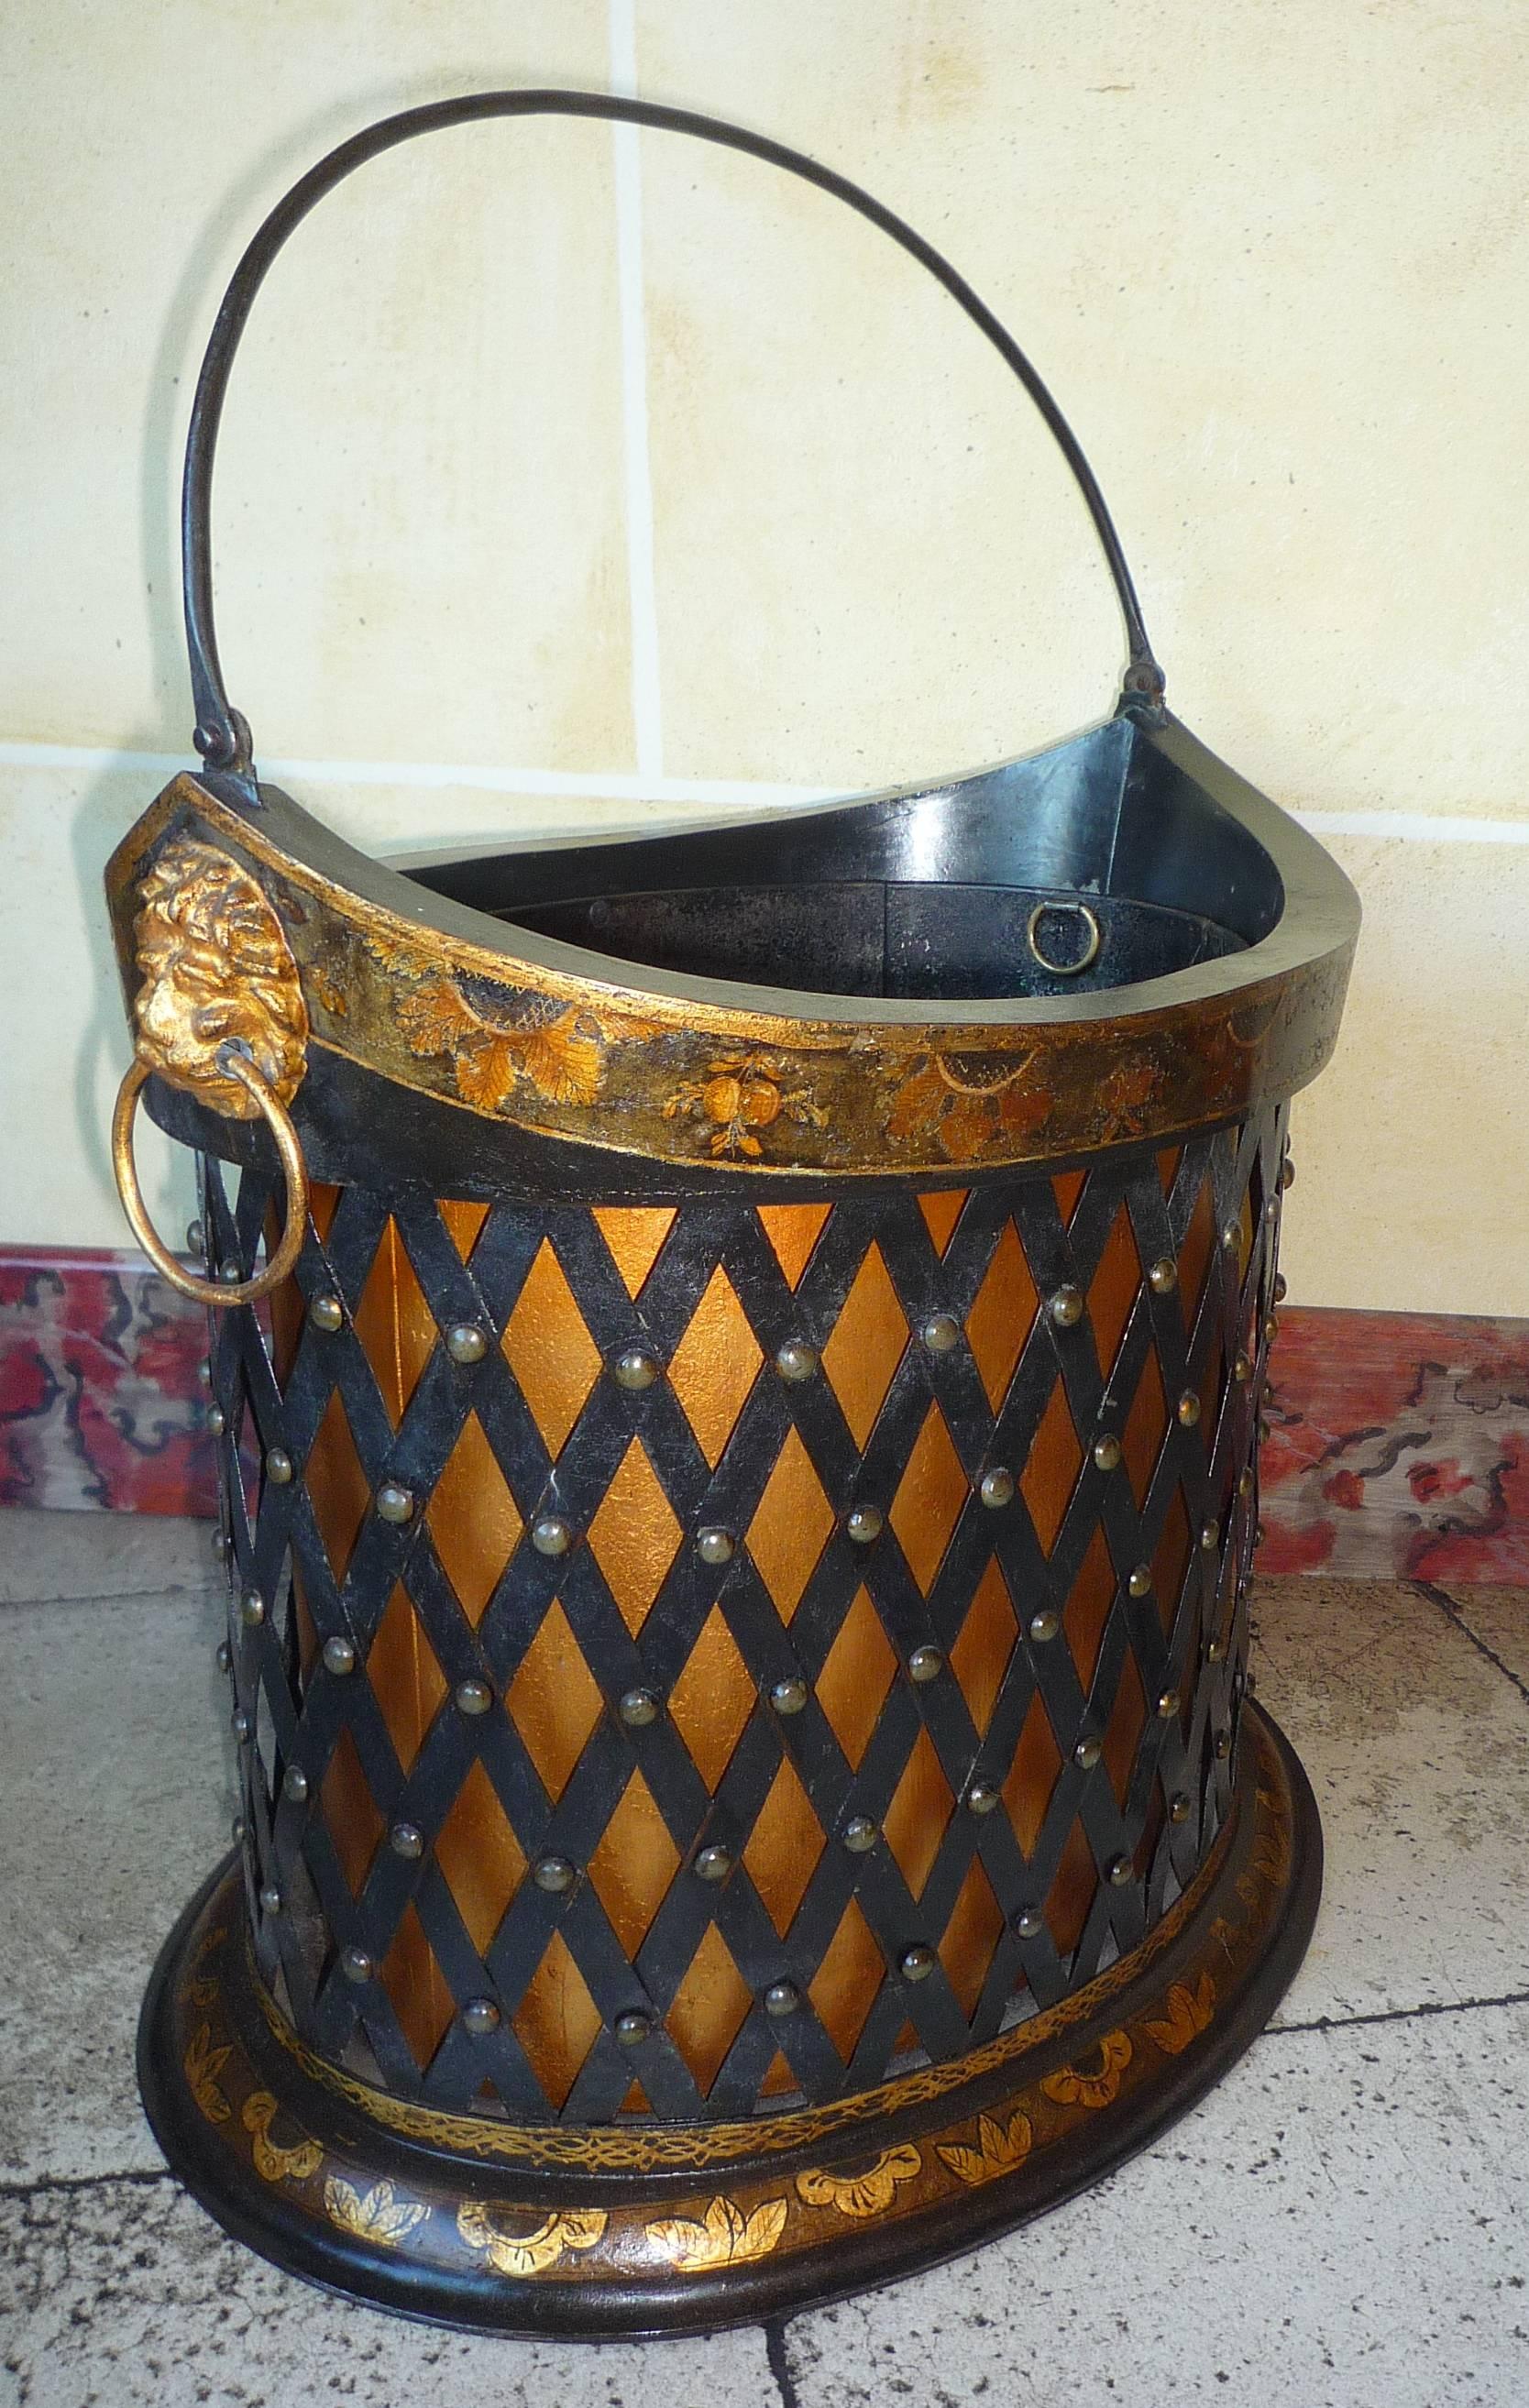 An English Regency period painted and gilt tole basket or coal bucket, the sides imitating trellis, circa 1810-1820.